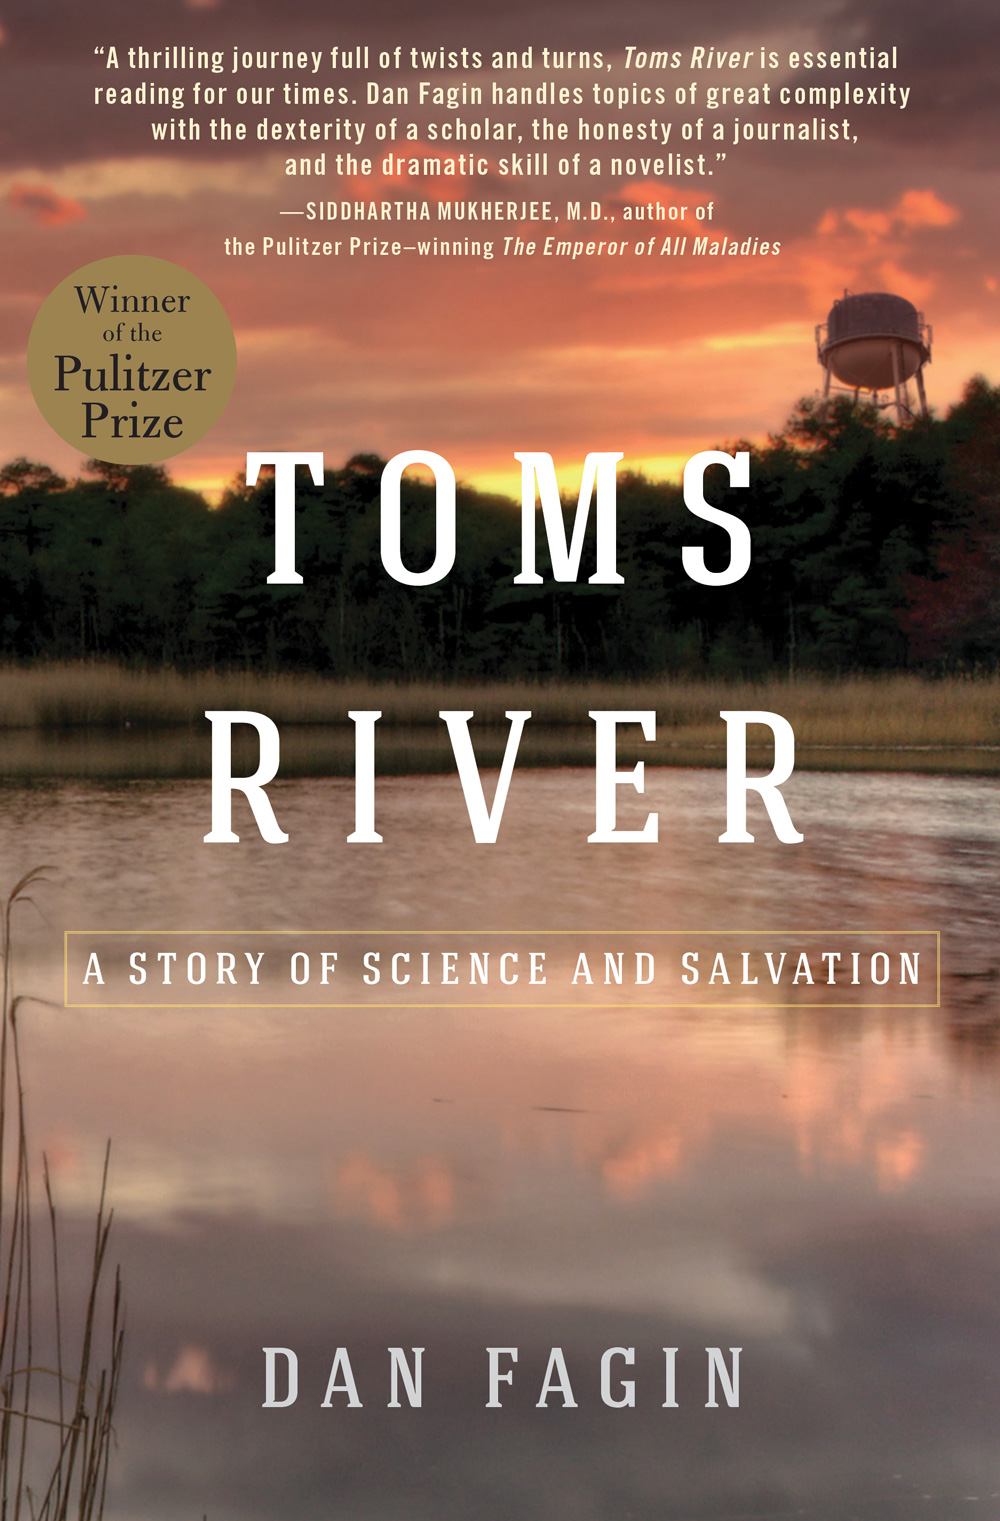 Toms River book cover